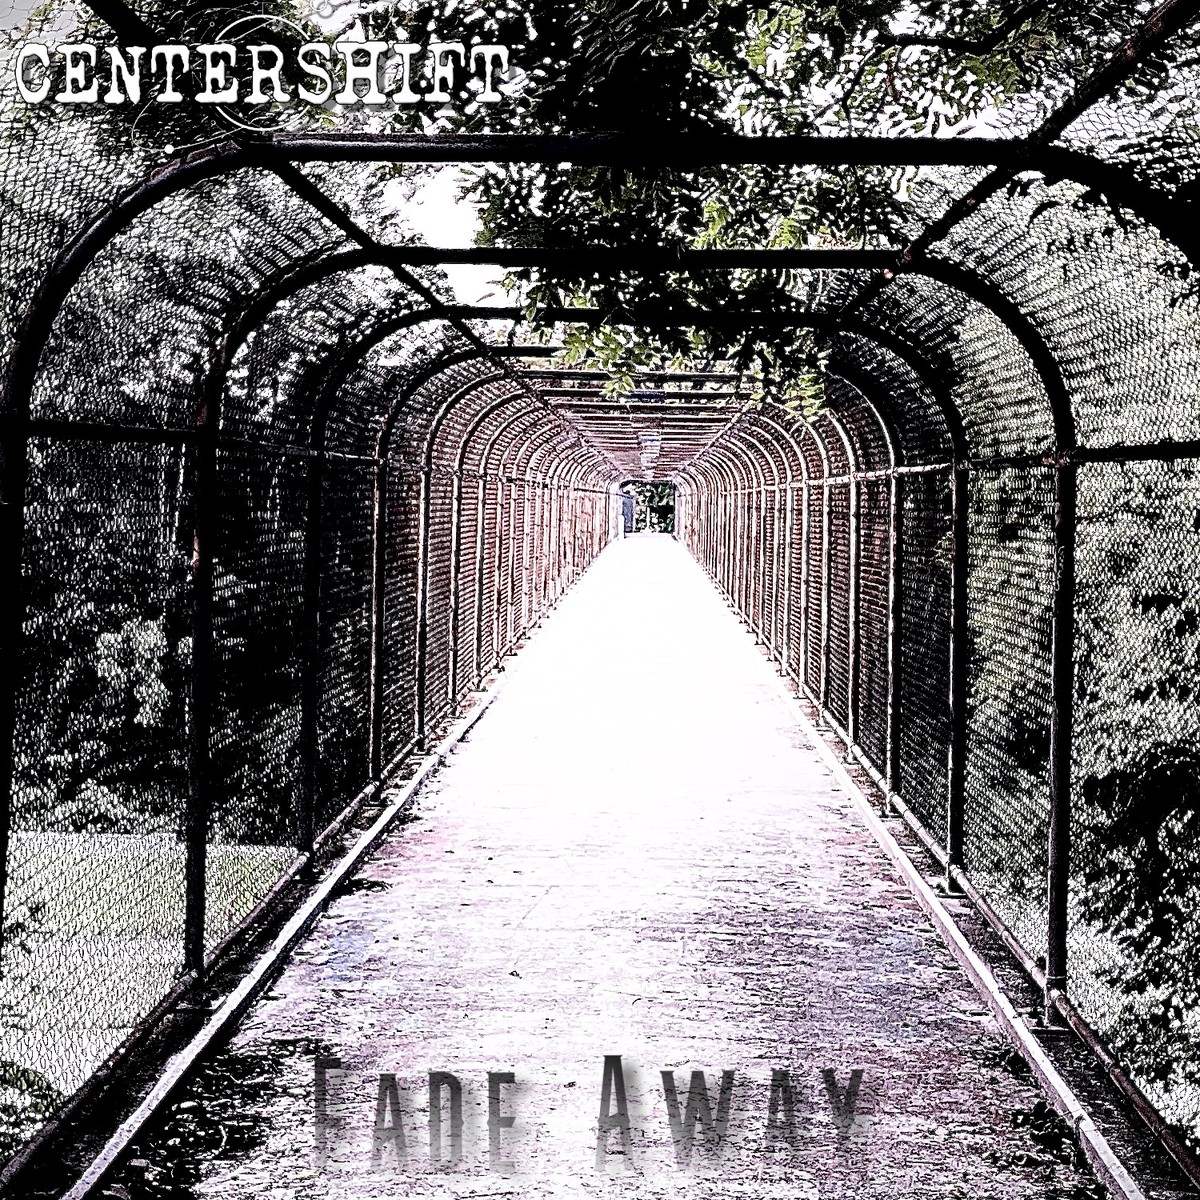 Artwork for the single “Fade Away” by Centershift